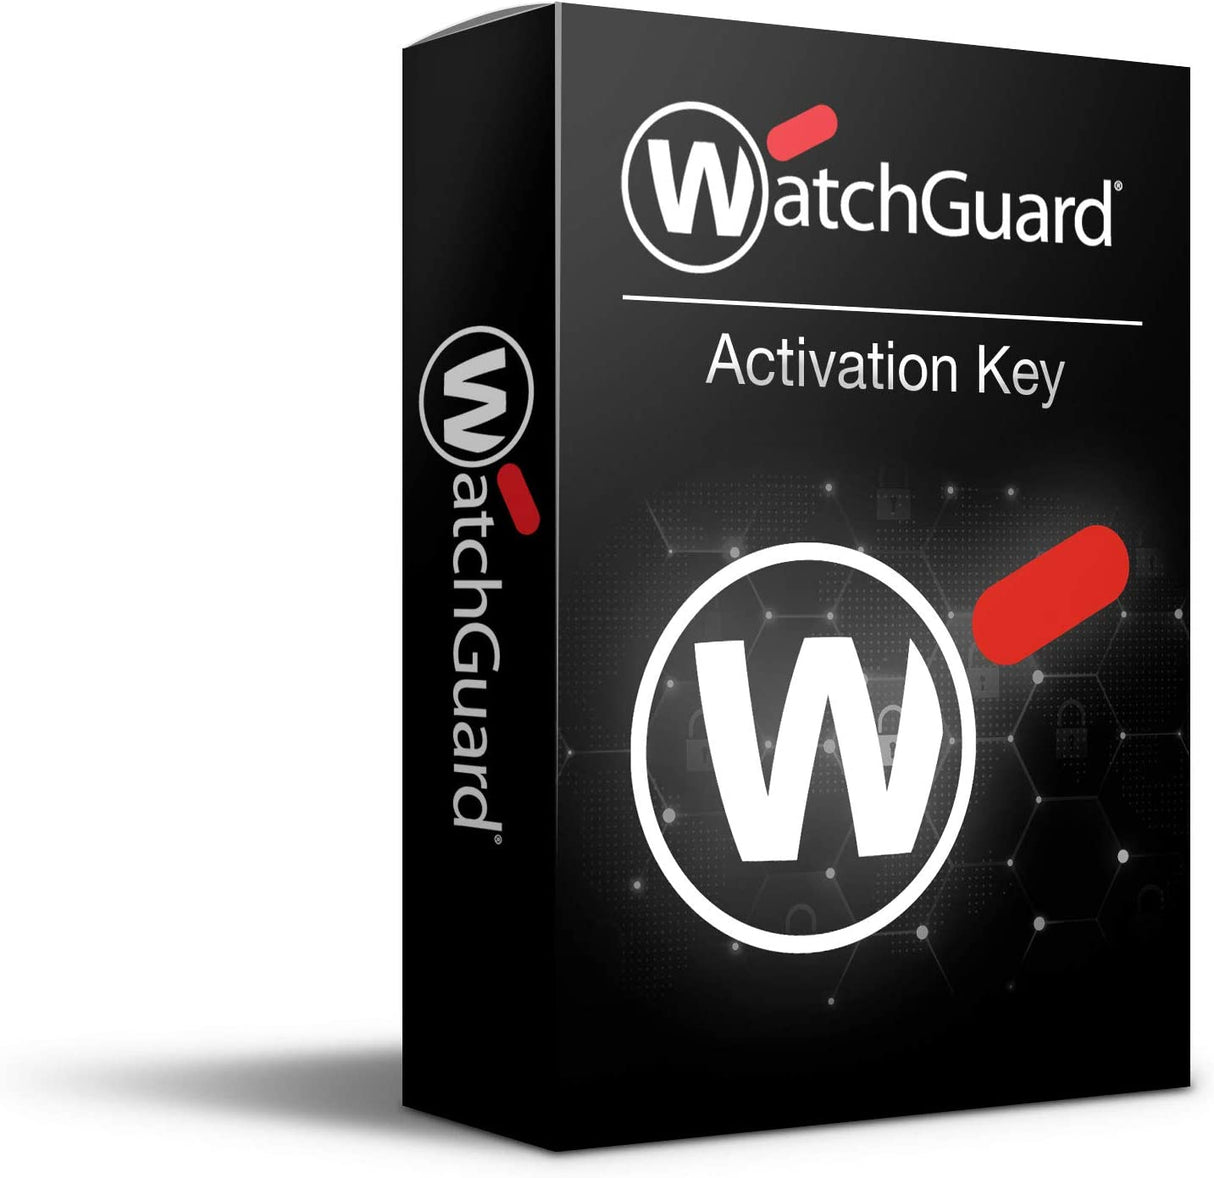 WatchGuard FireboxV Large Trade up with 1YR Basic Security Suite WGVLG061